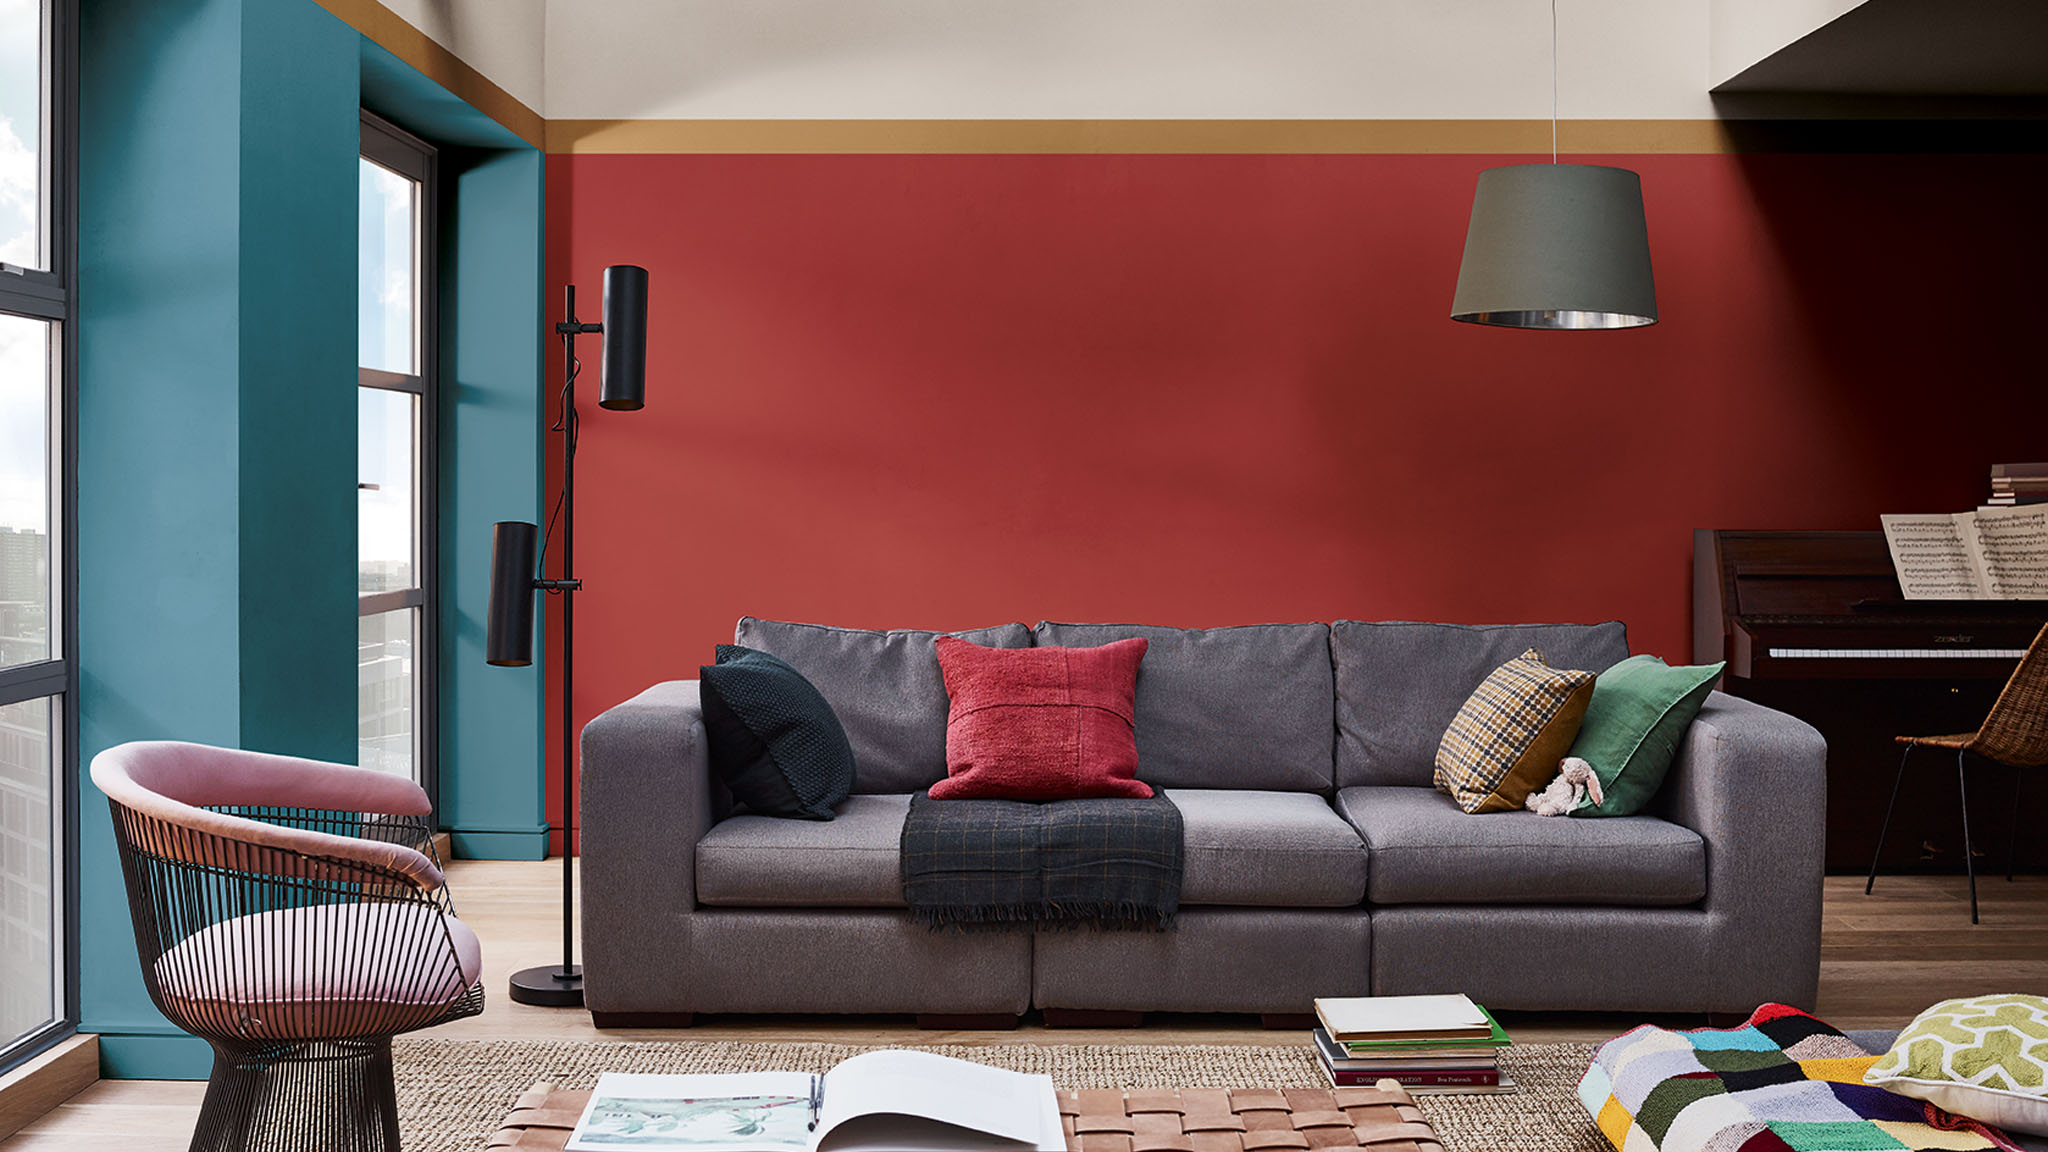 A living room in deep reds and rich teals